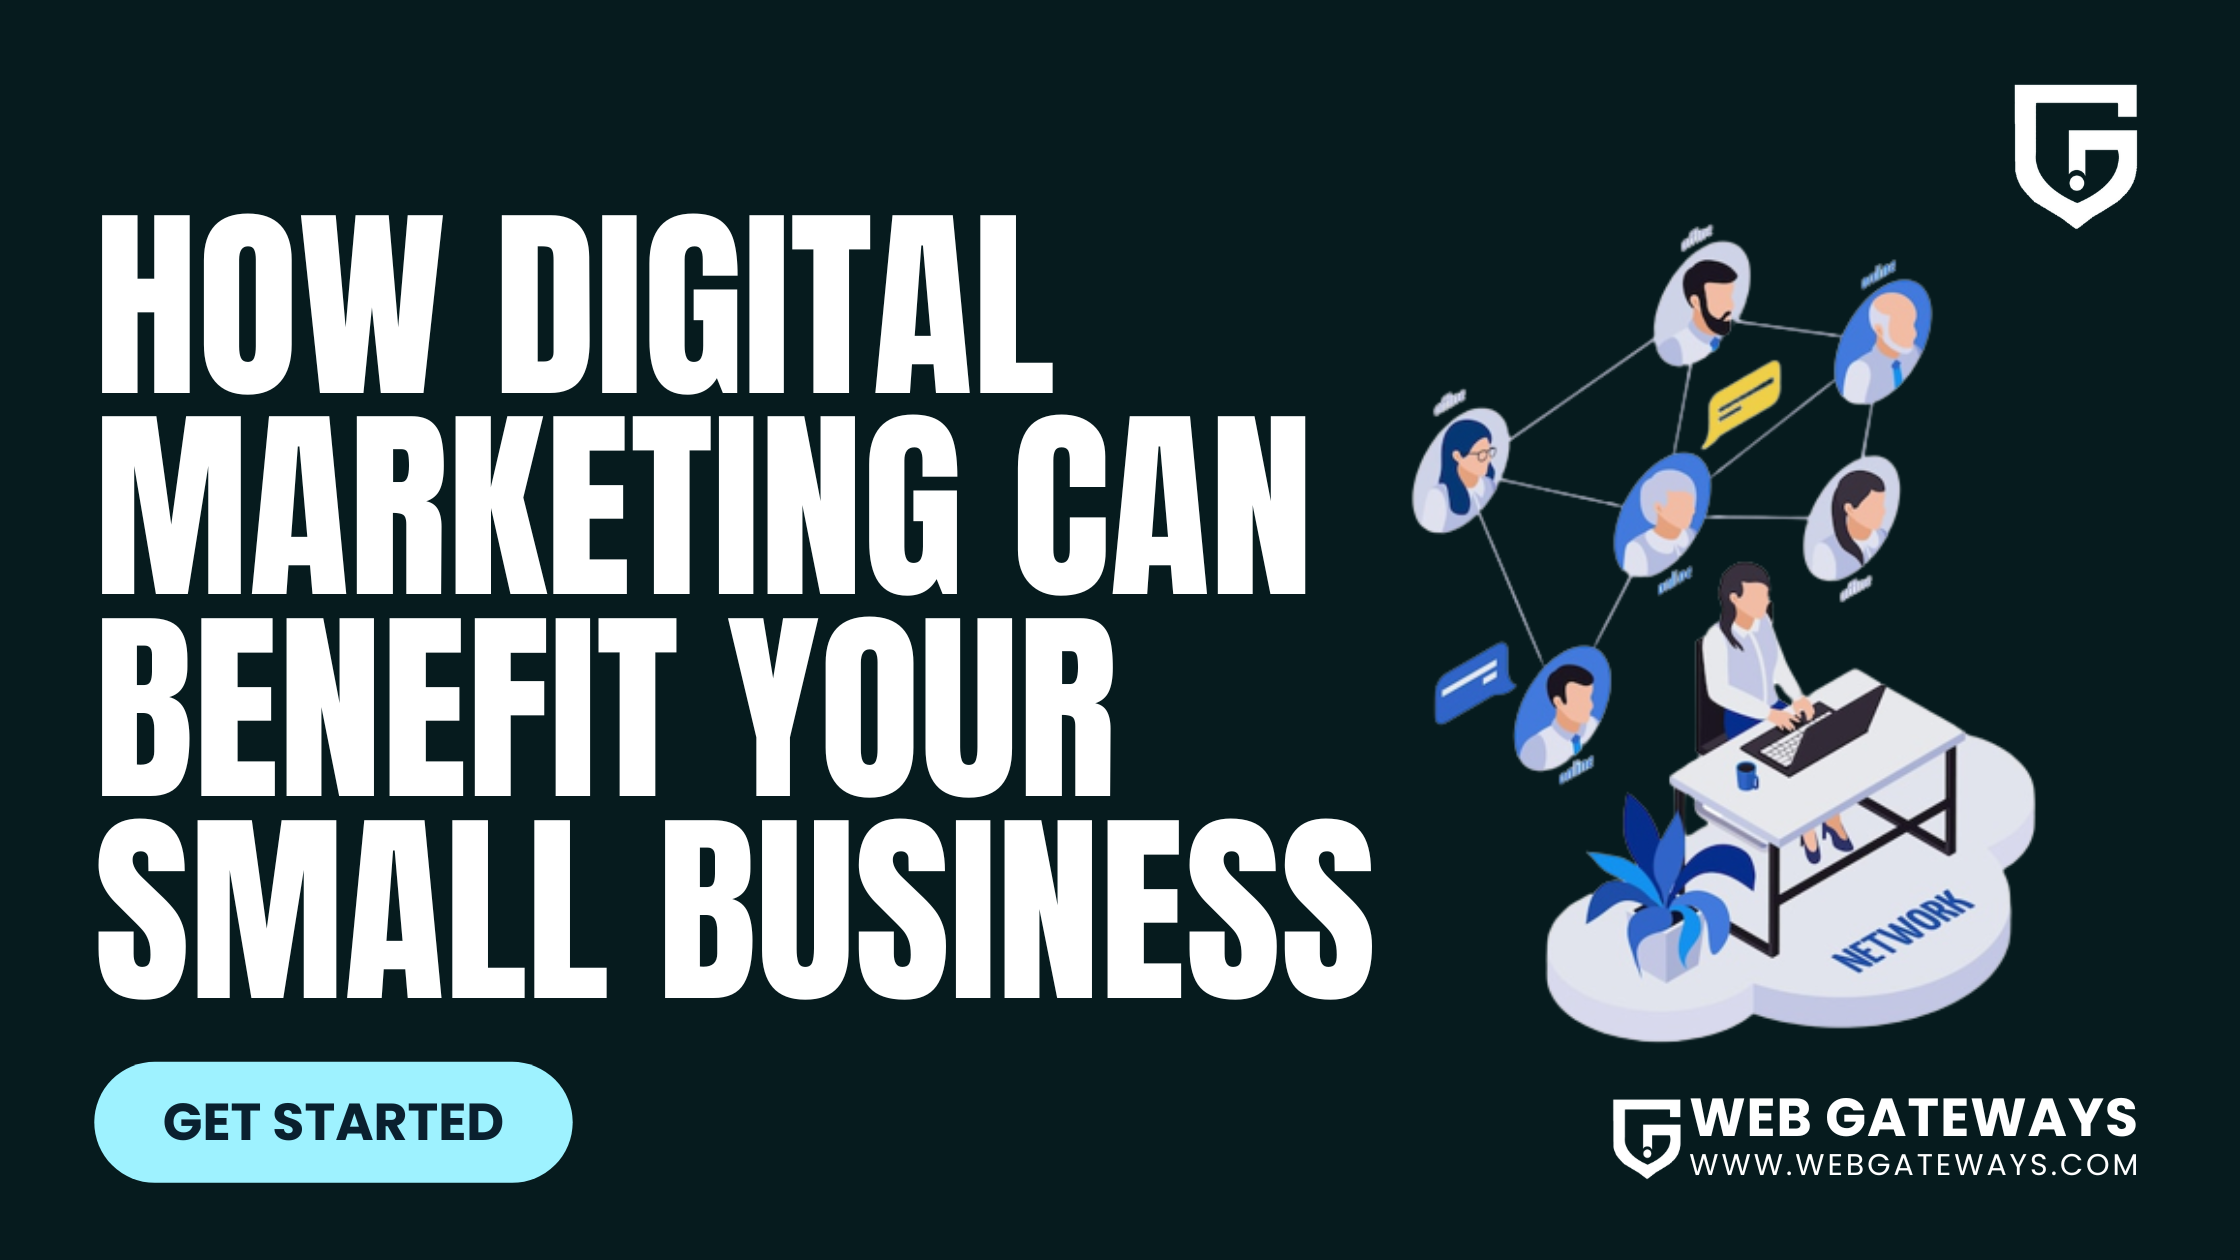 How Digital Marketing Can Benefit Your Small Business